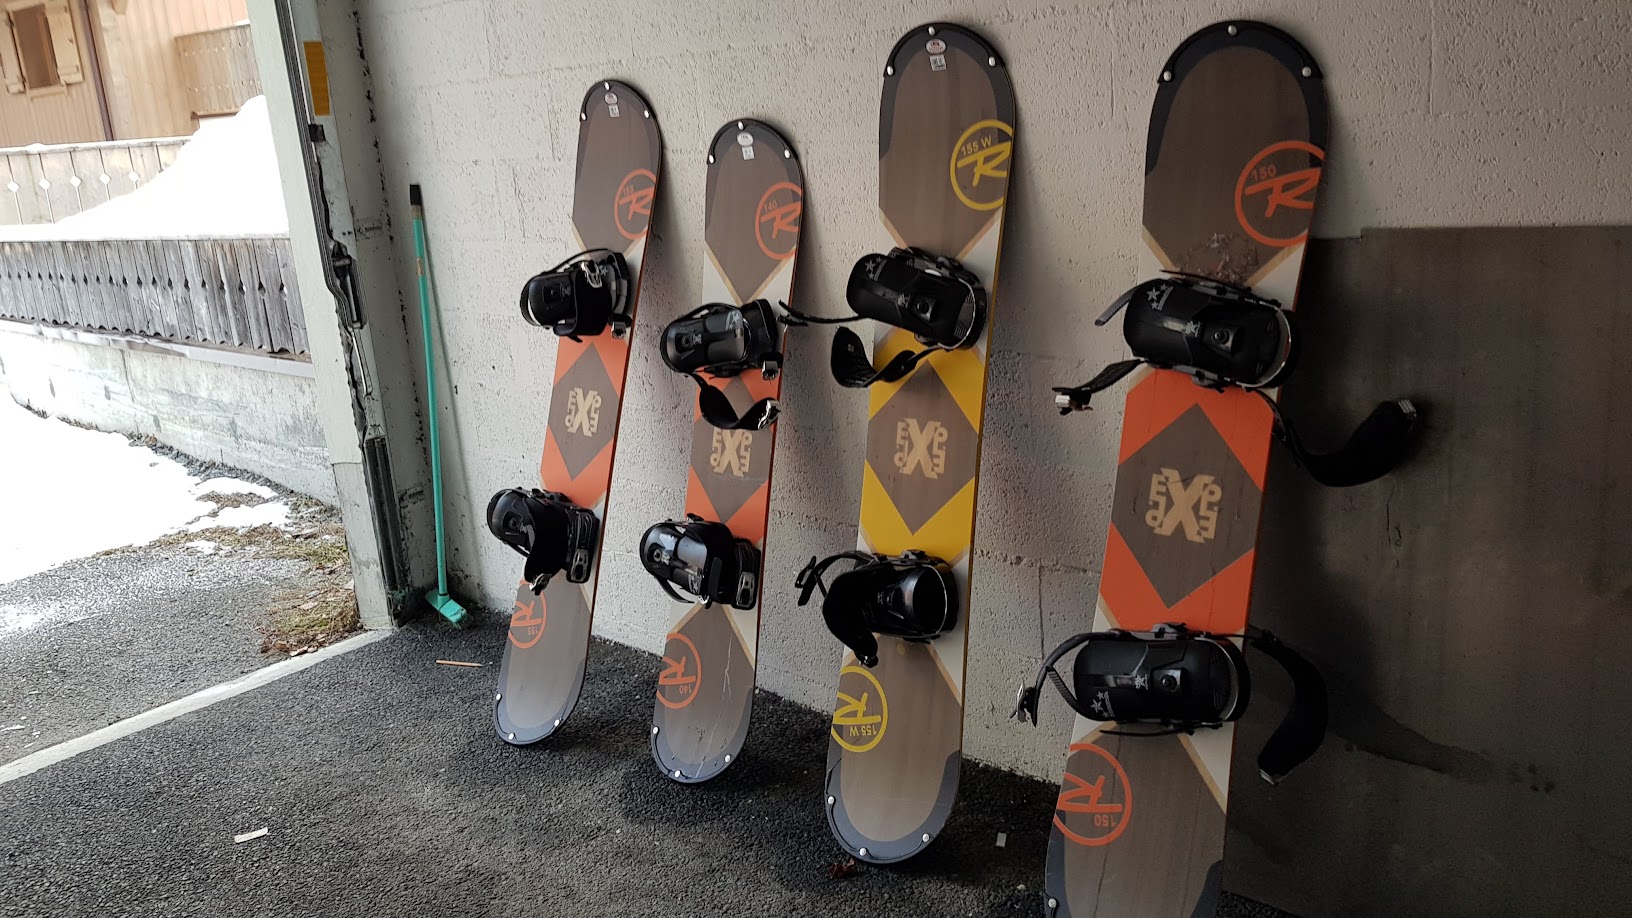 Storing the snowboards in the garage